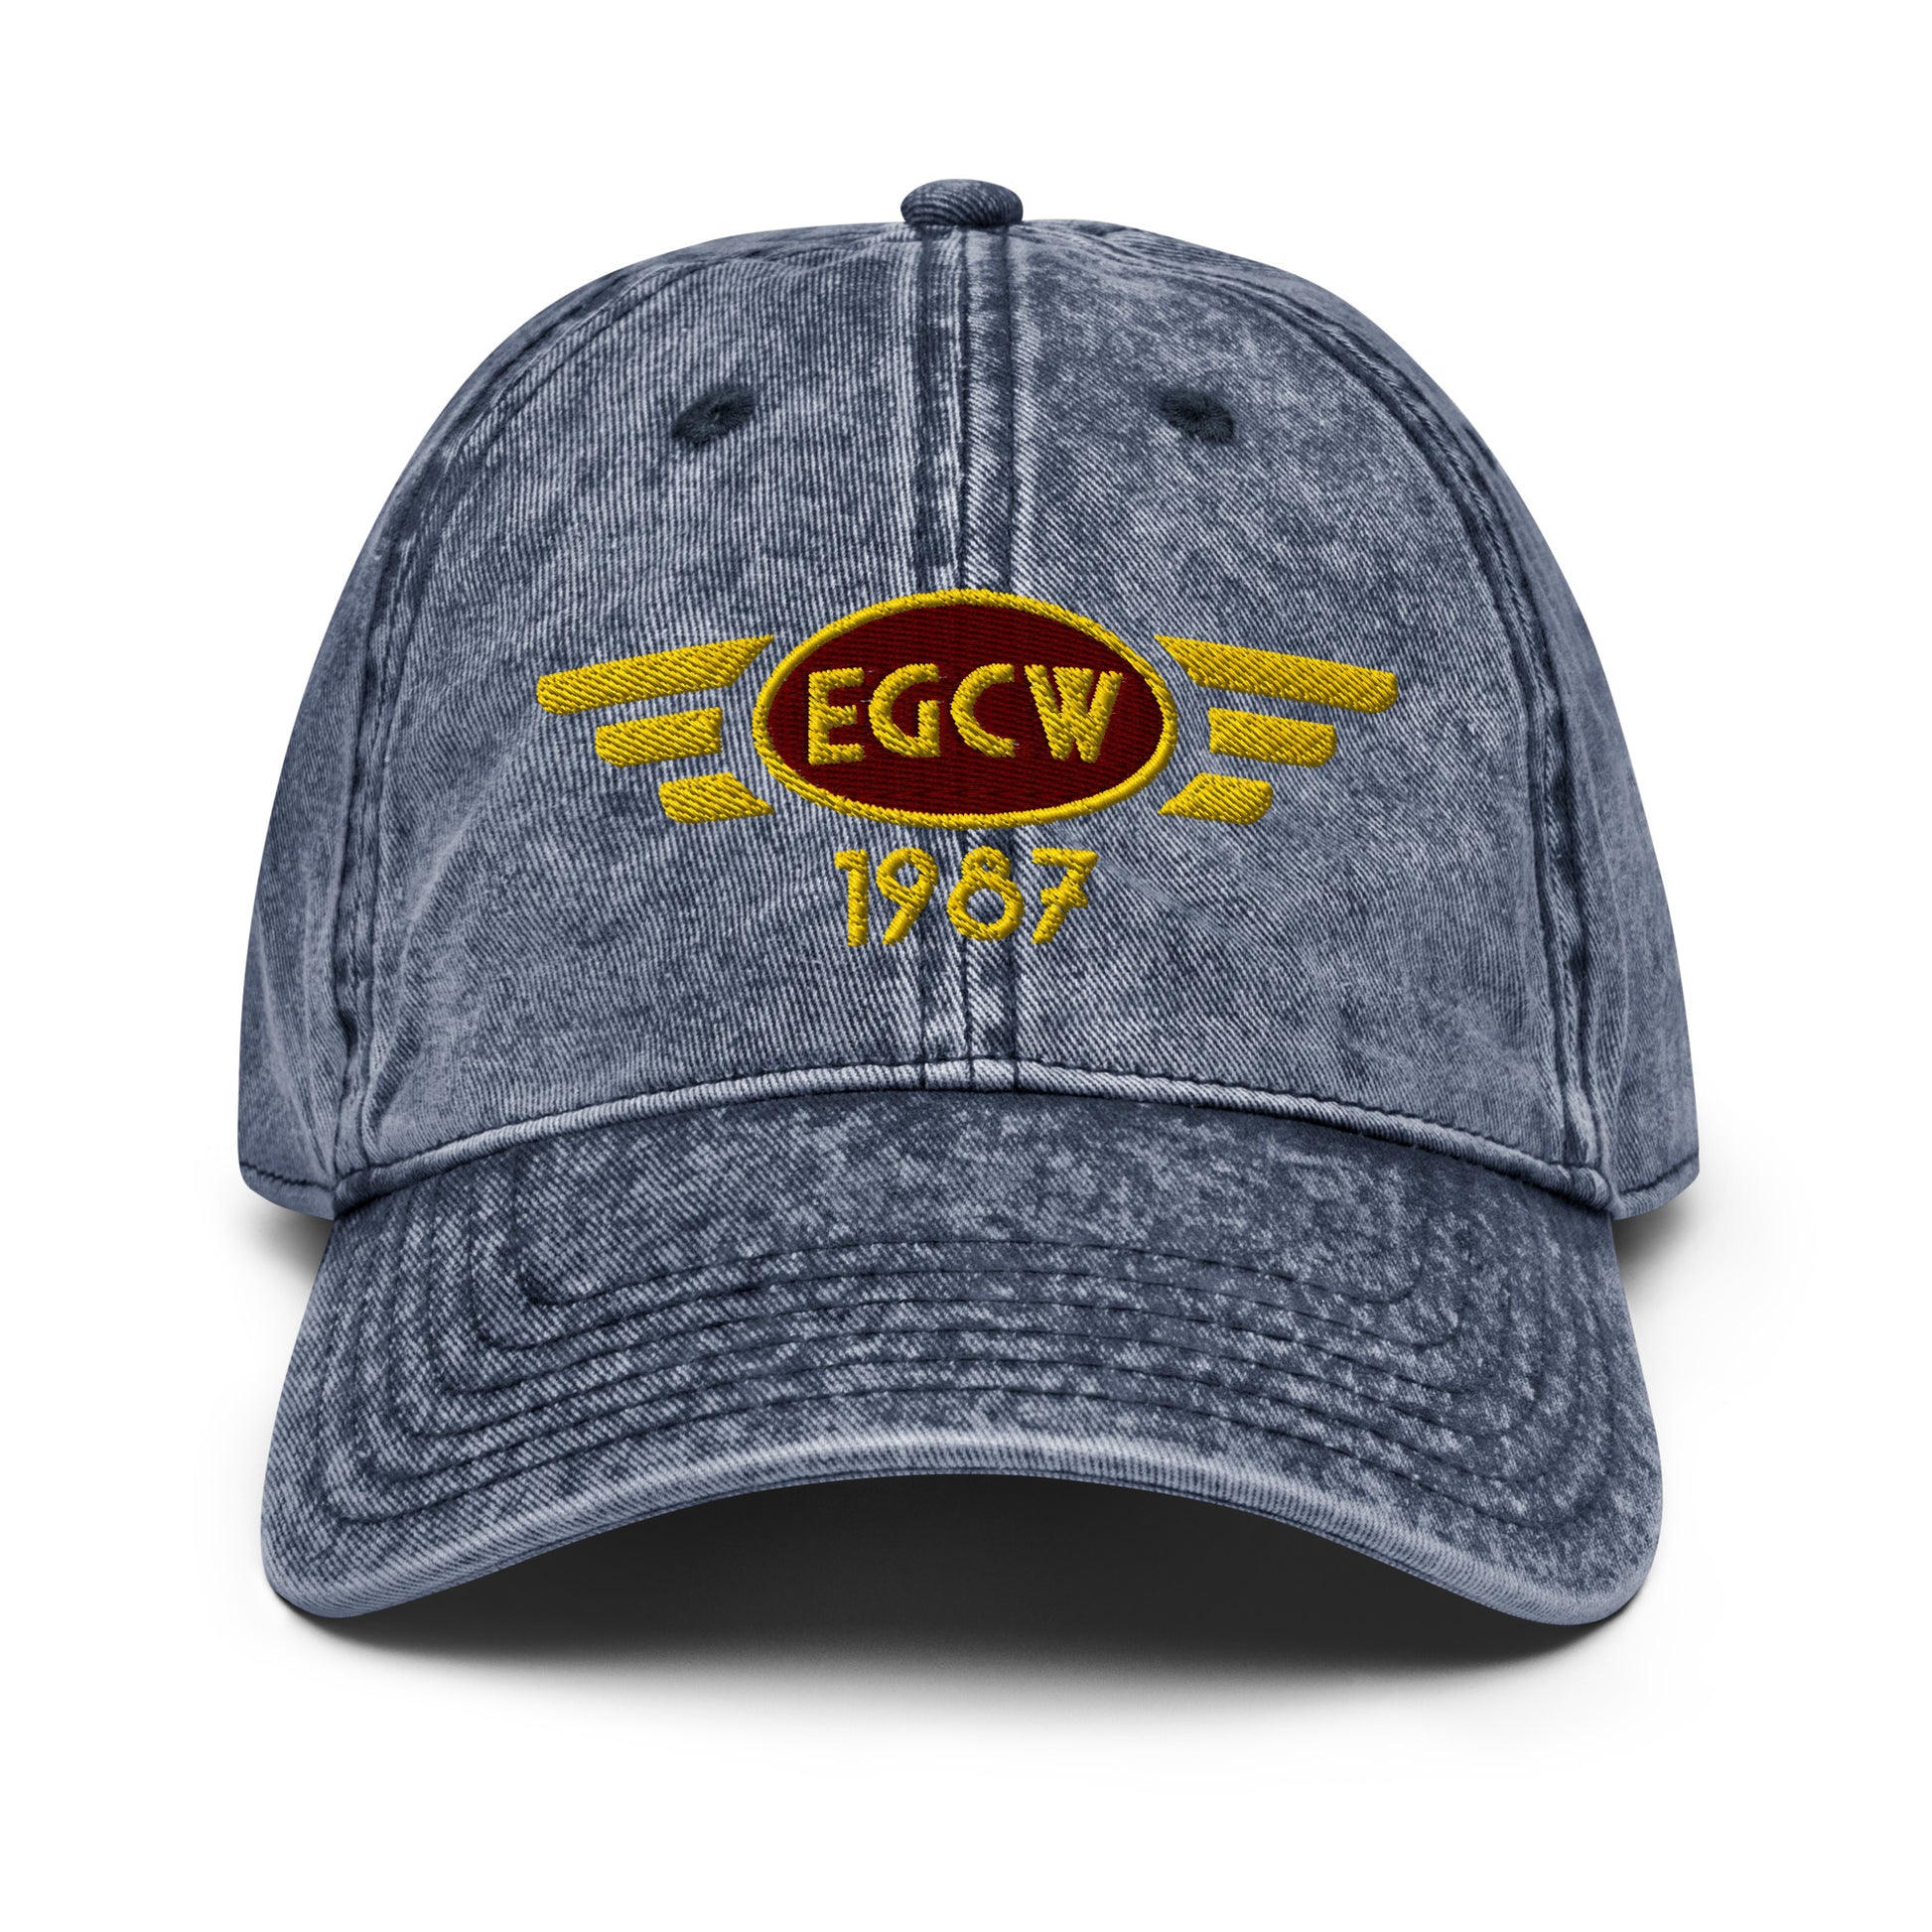 Blue cotton twill baseball cap with embroidered vintage style aviation logo for Welshpool Airport.